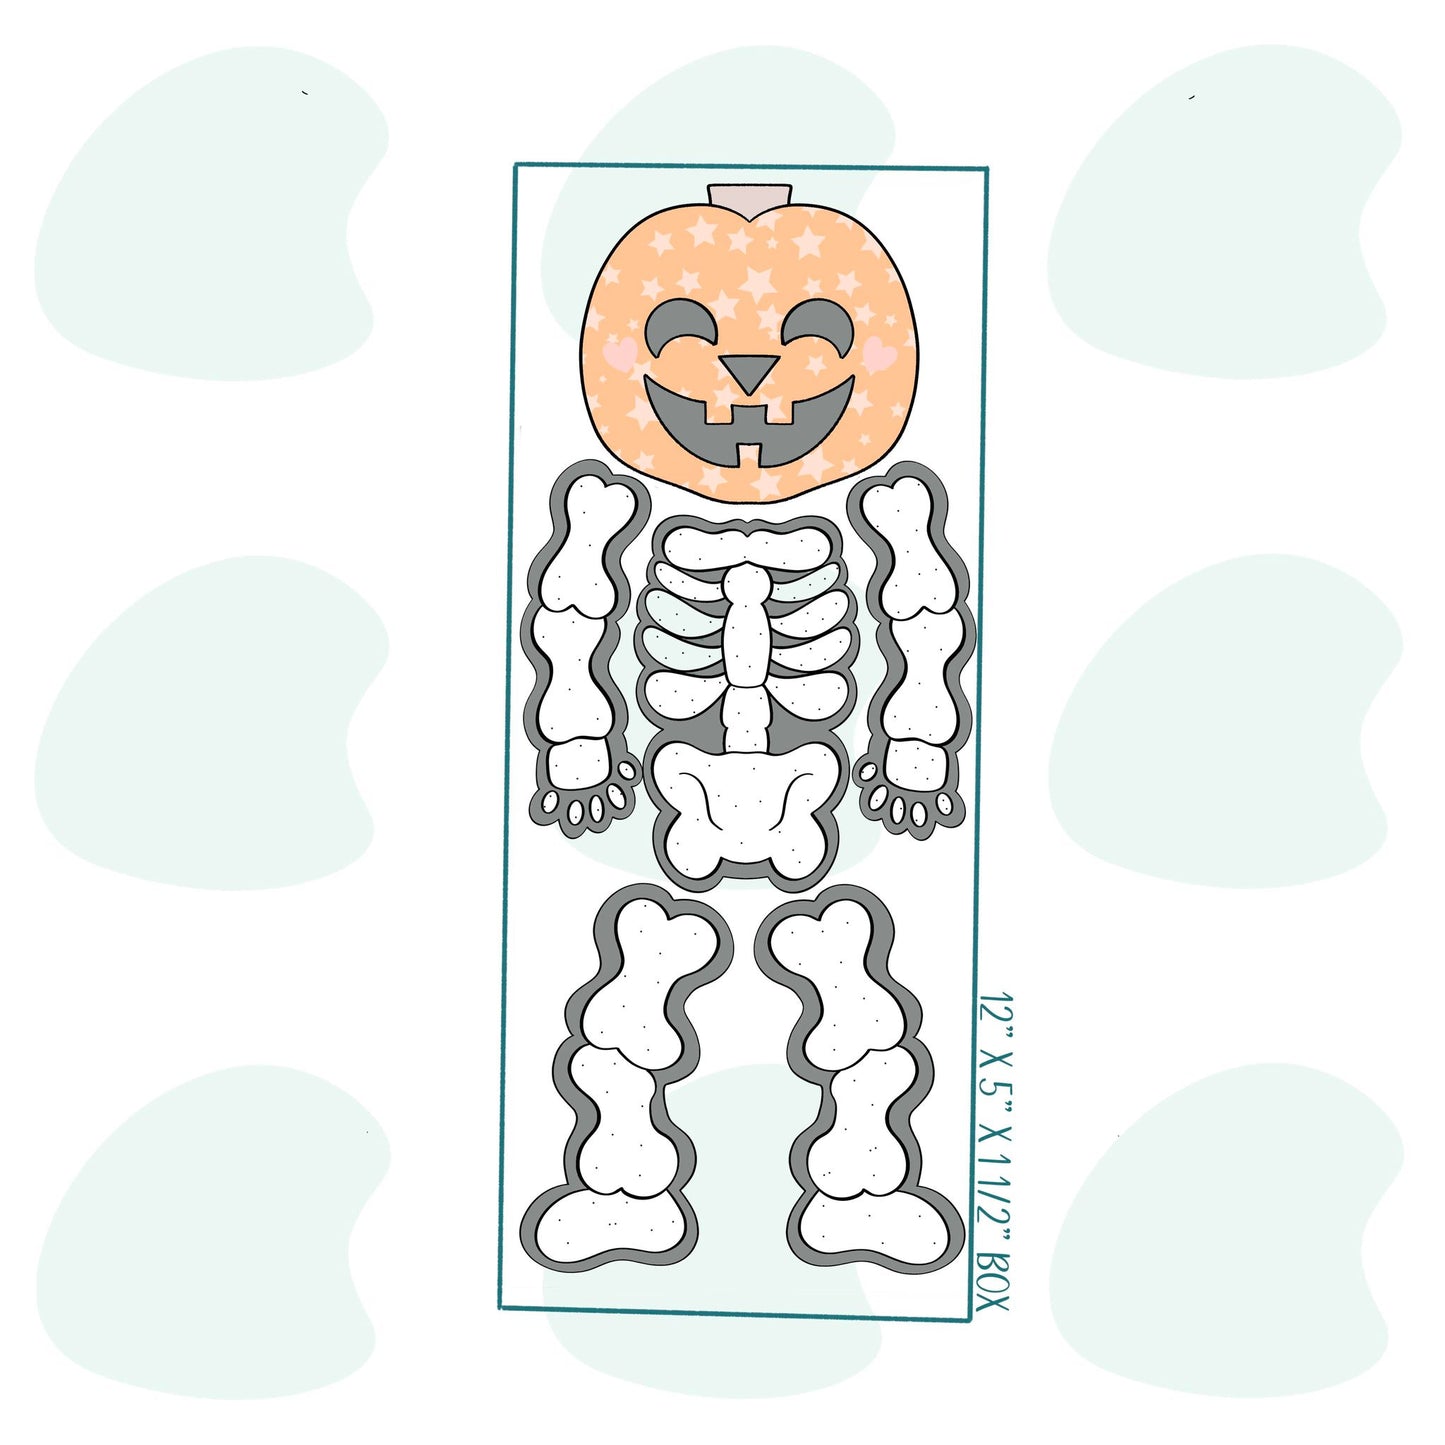 Build-A-Skeleton Set Additional Skull Faces - Cookie Cutters